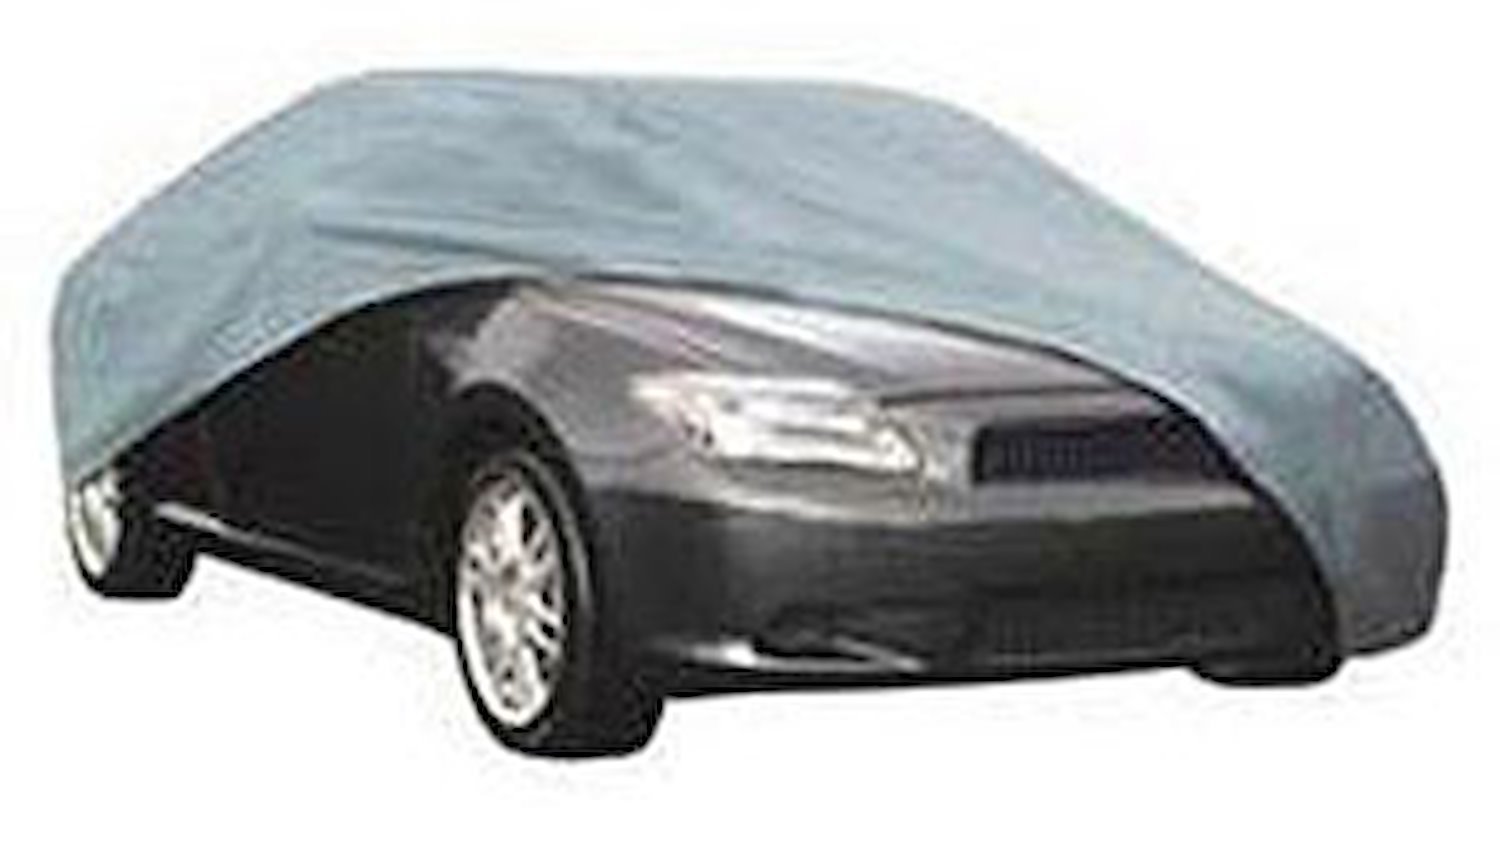 Budge Lite Car Cover Fits Cars Up To